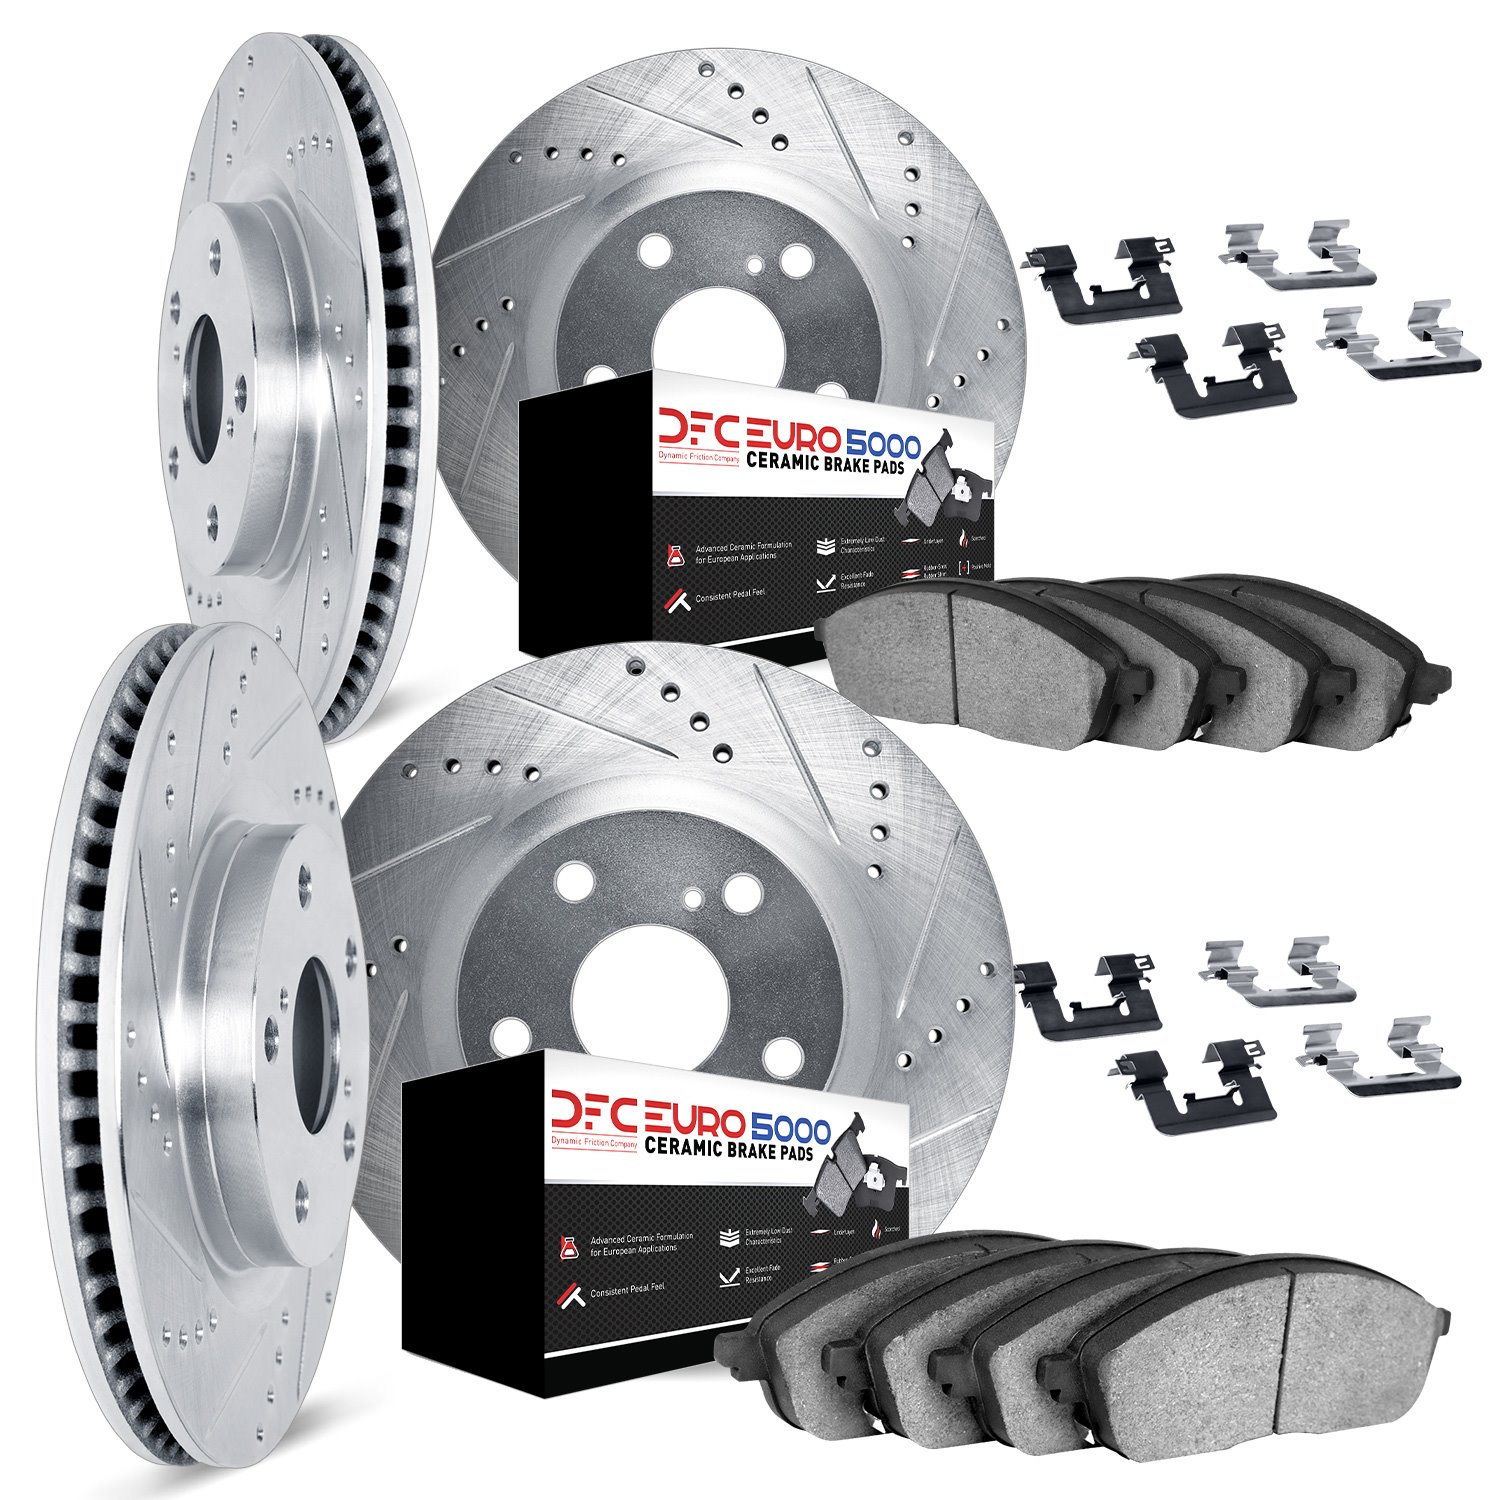 7614-31018 Drilled/Slotted Brake Rotors w/5000 Euro Ceramic Brake Pads Kit & Hardware [Silver], 2000-2003 BMW, Position: Front a